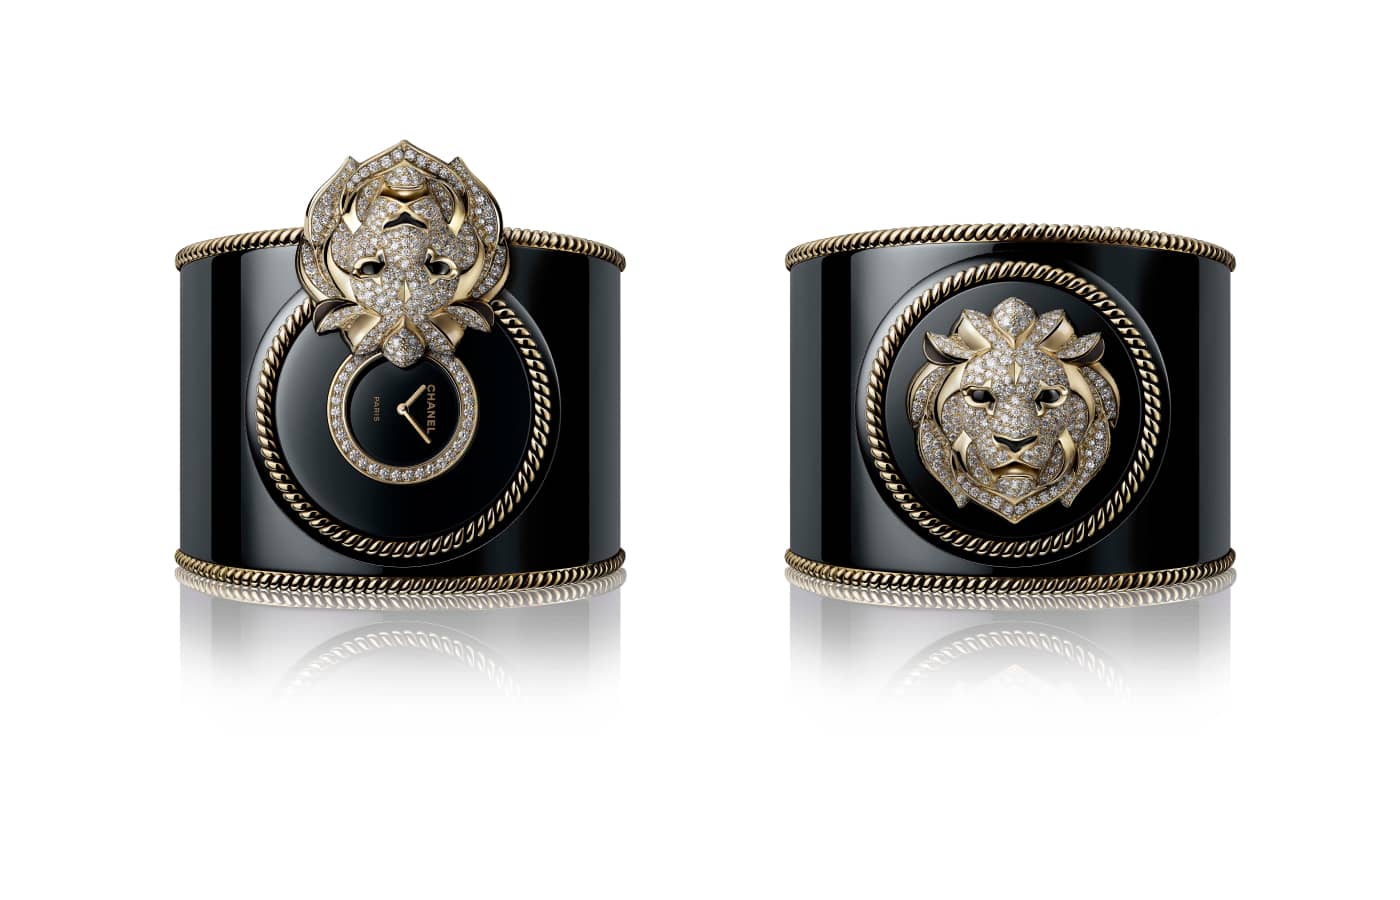 Chanel Mademoiselle Privé Lion Cuff High Jewellery watch in gold, onyx, black lacquer and diamond